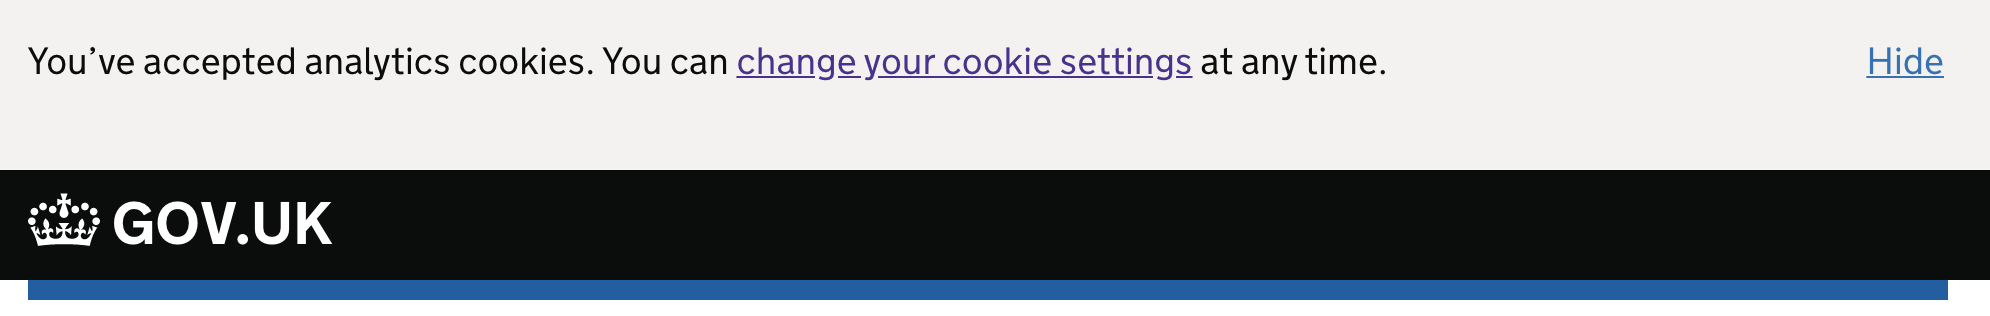 If the user accepts the use of cookies, a confirmation message is displayed with a link which allows them to change their cookie setting at any time